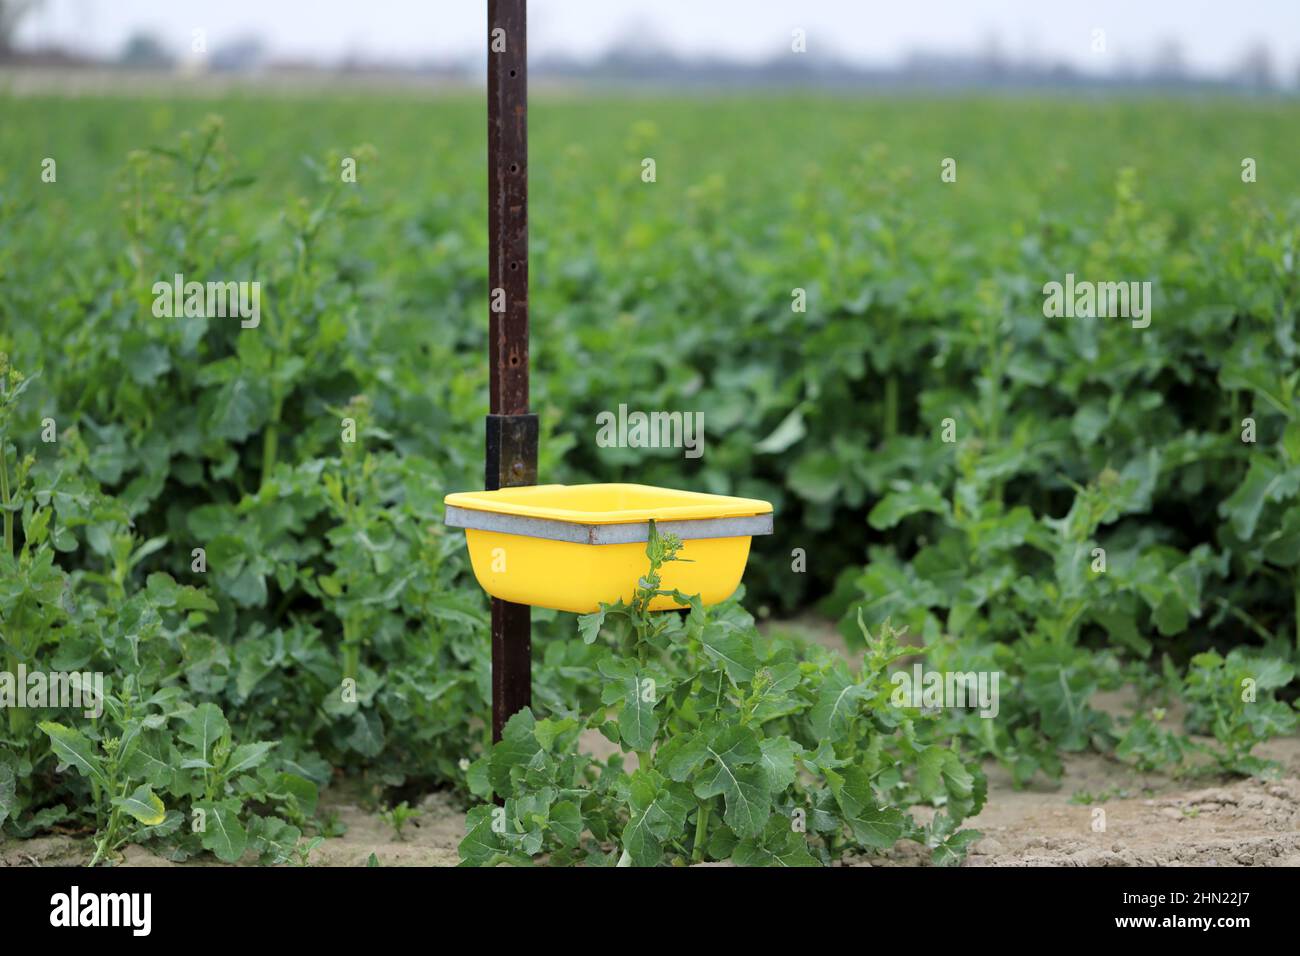 A yellow water dish placed on a canola crop to monitor pests. Stock Photo